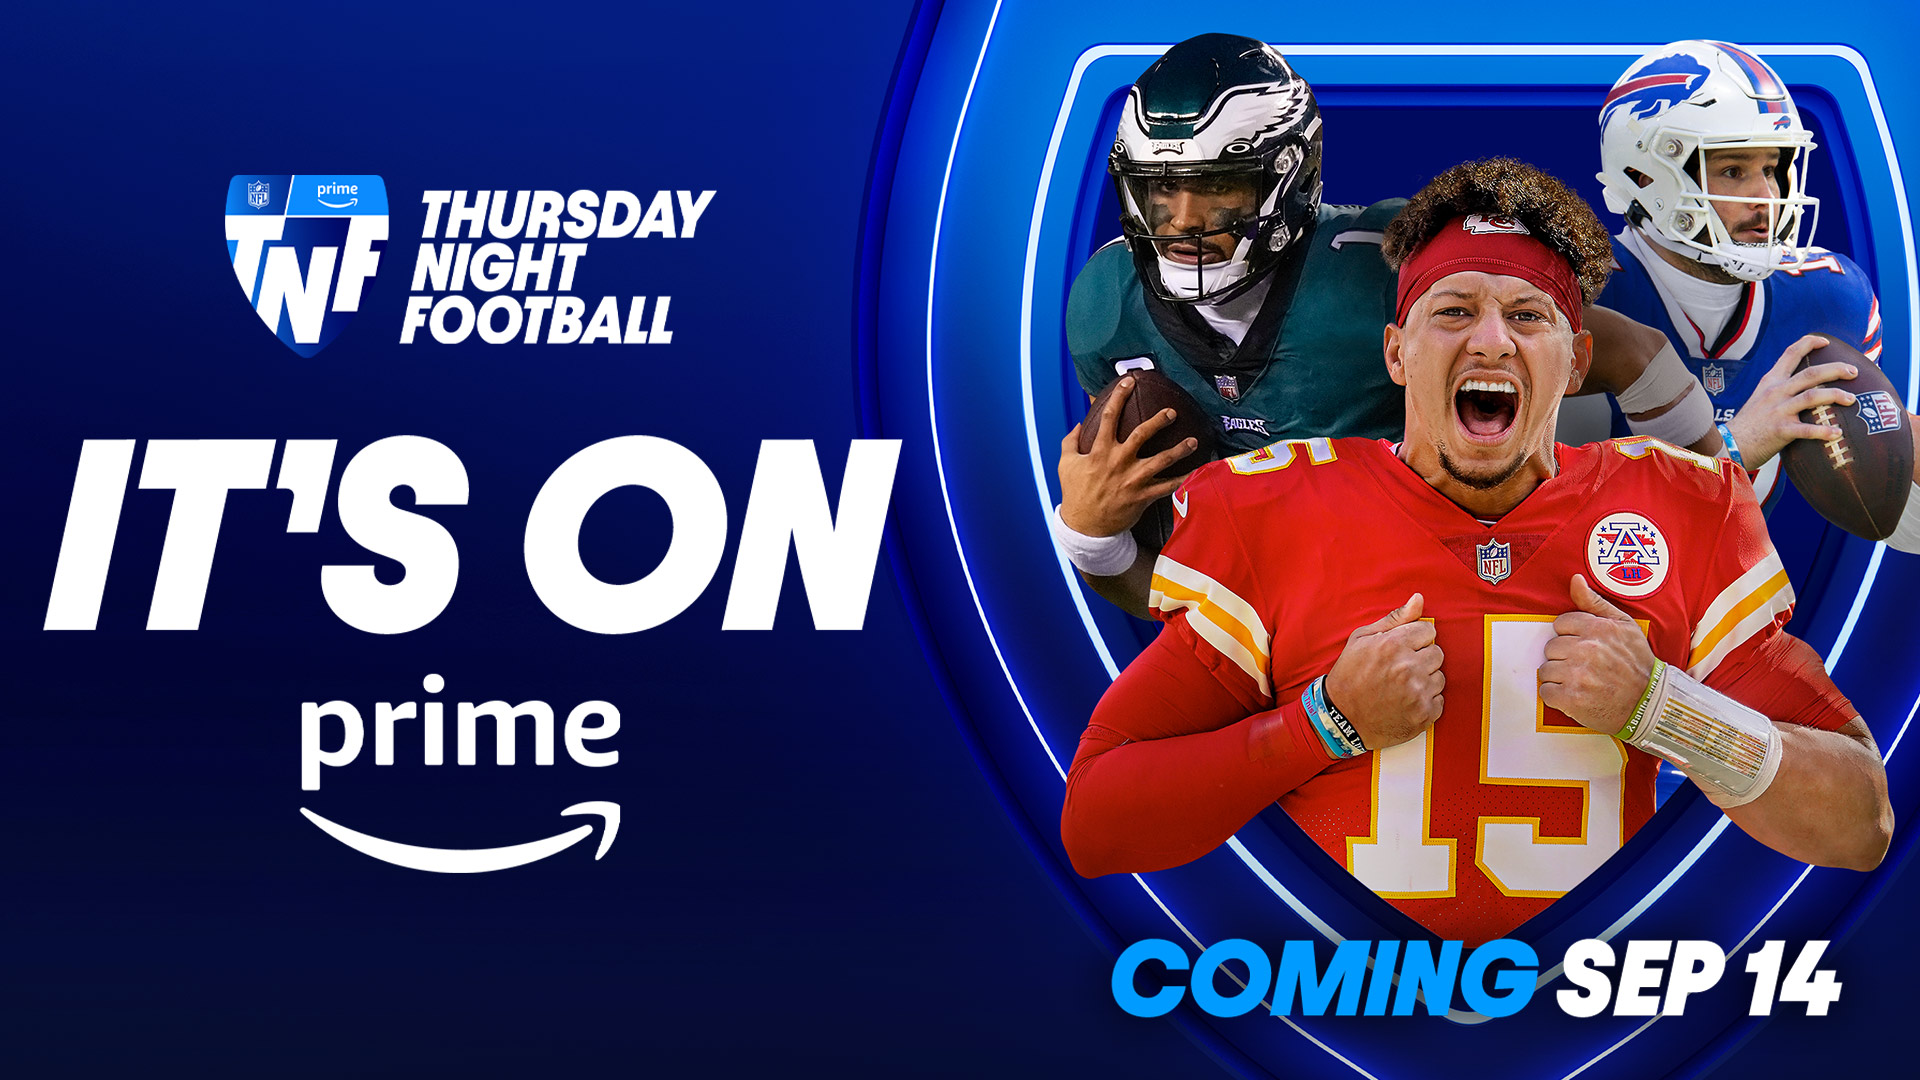 thursday night football on prime schedule